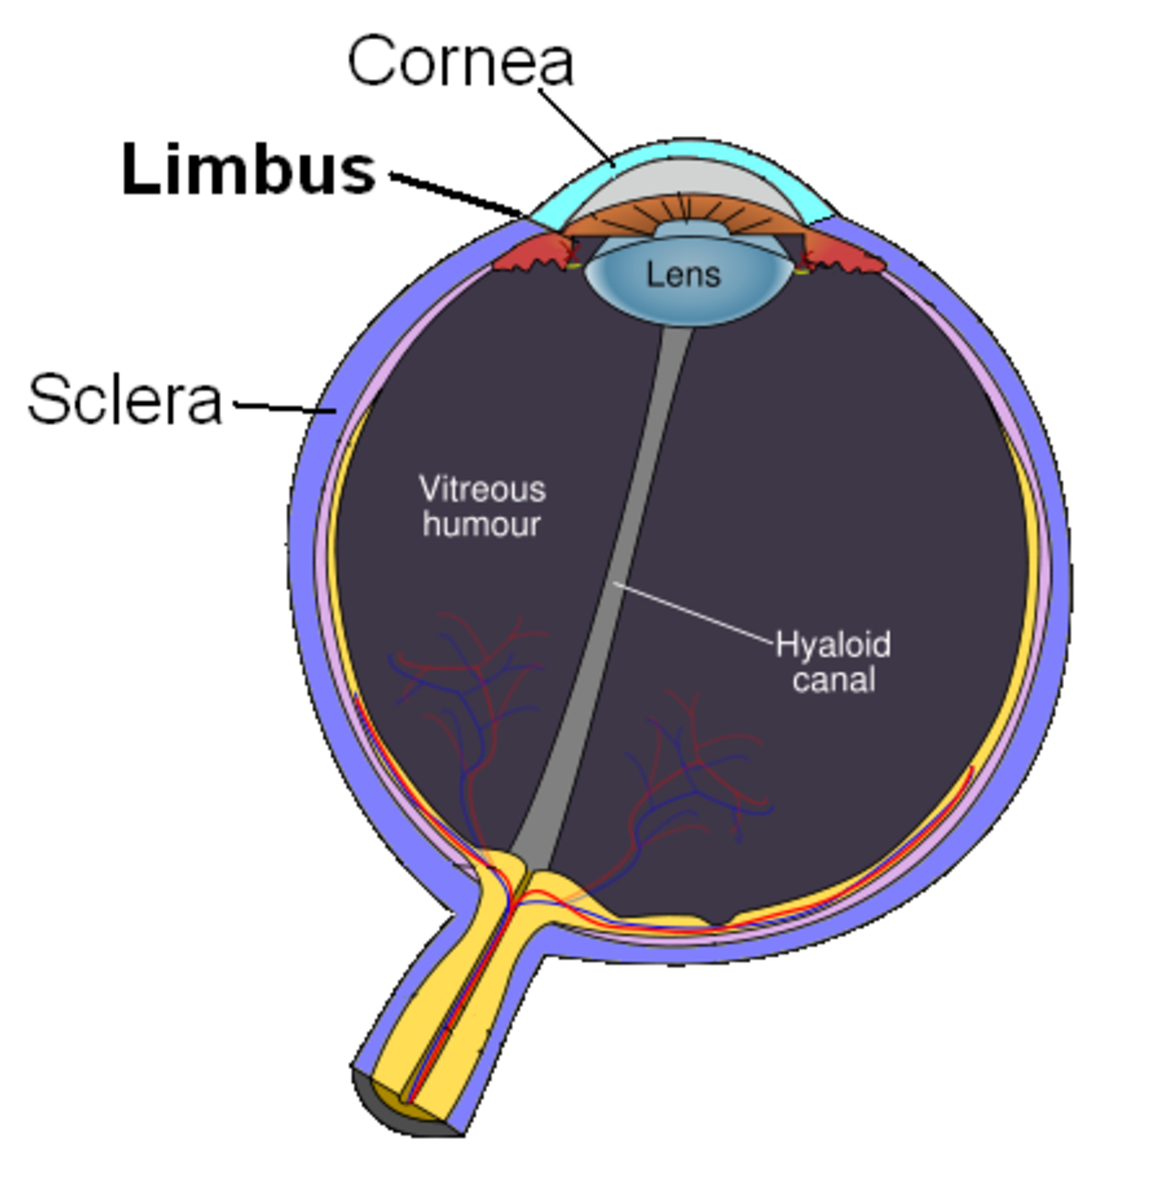 The corneal limbus is a border separating the cornea from the sclera.